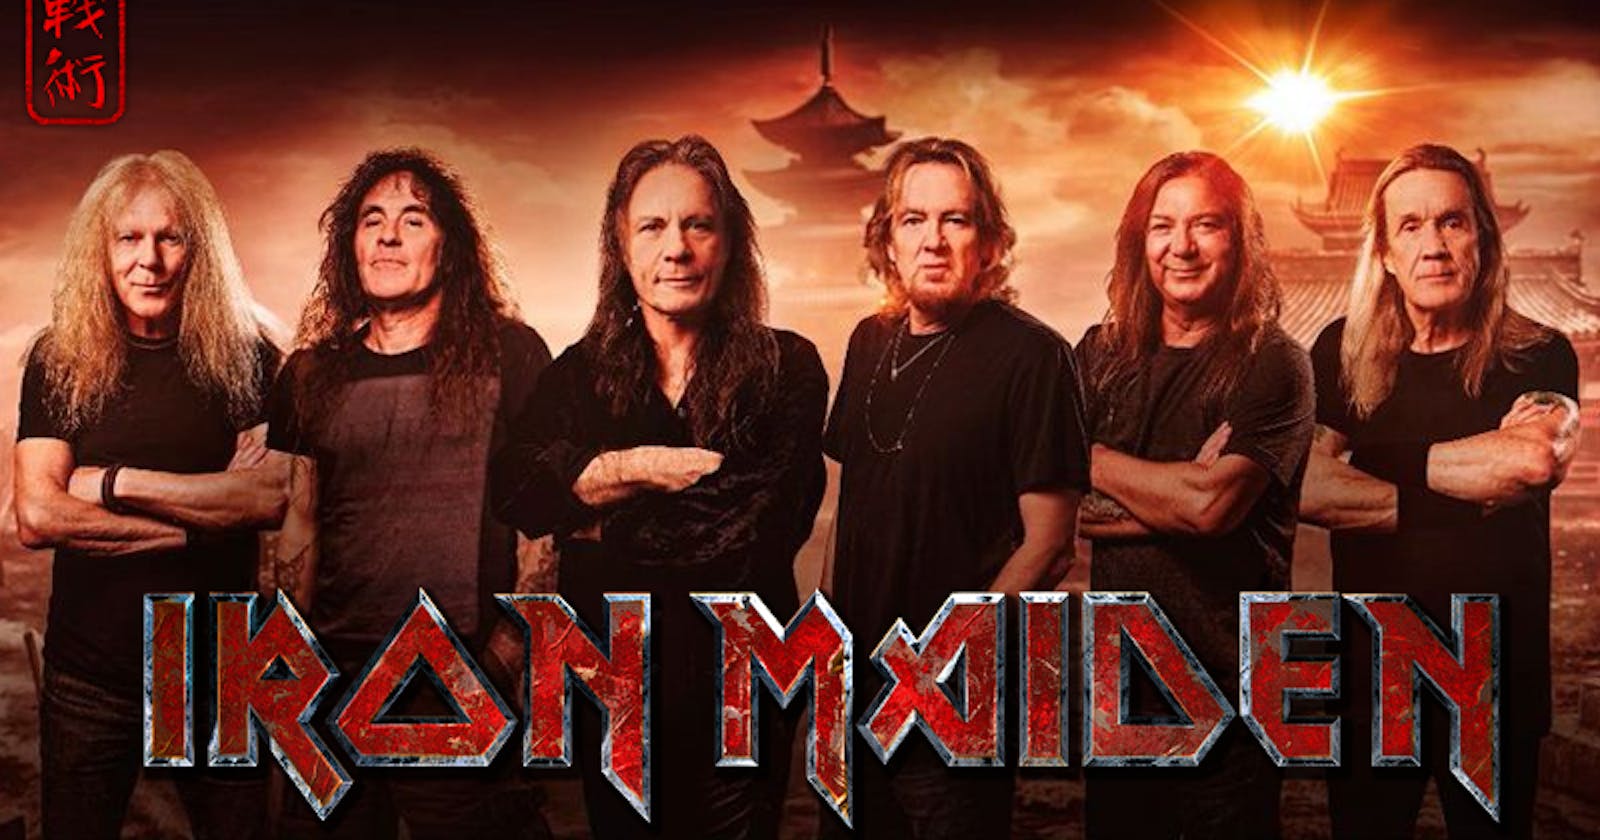 From Metal Riffs to Binary Code: What We Can Learn From Iron Maiden Band!